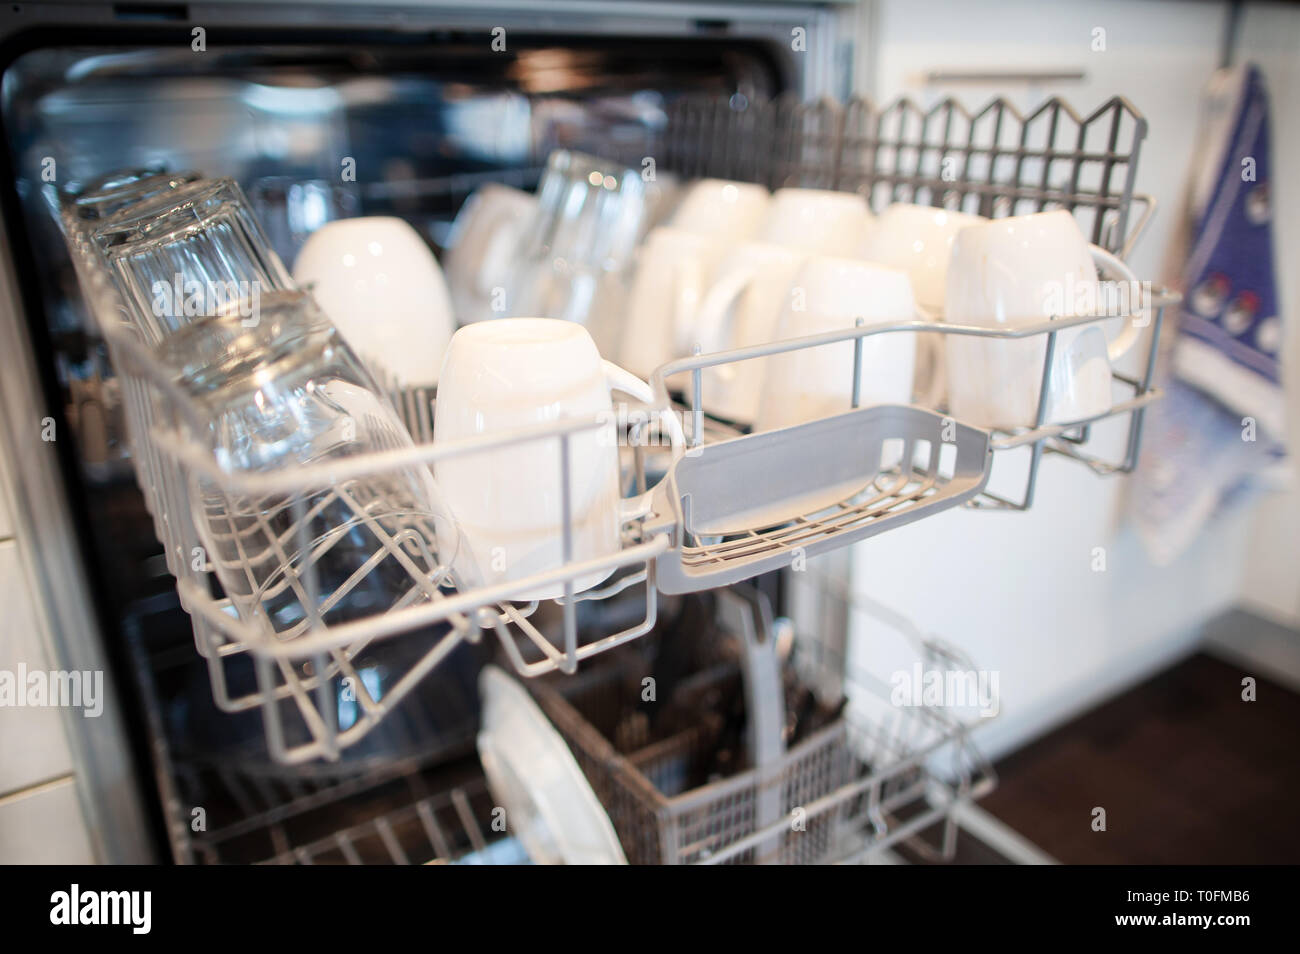 20 March 2019, North Rhine-Westphalia, Düsseldorf: Glasses and cups stand in a dishwasher in Düsseldorf. In the kitchens of North Rhine-Westphalia, microwave ovens and dishwashers are increasingly becoming standard appliances. Currently, three out of four households already rely on the devices, as the State Statistical Office announced on Wednesday with figures for 2018. Accordingly, 75.6 percent of households in the previous year had a microwave, 72.8 percent a dishwasher. Compared to the figures from 15 years ago, there was a significant increase of almost 16 percentage points, especially in Stock Photo